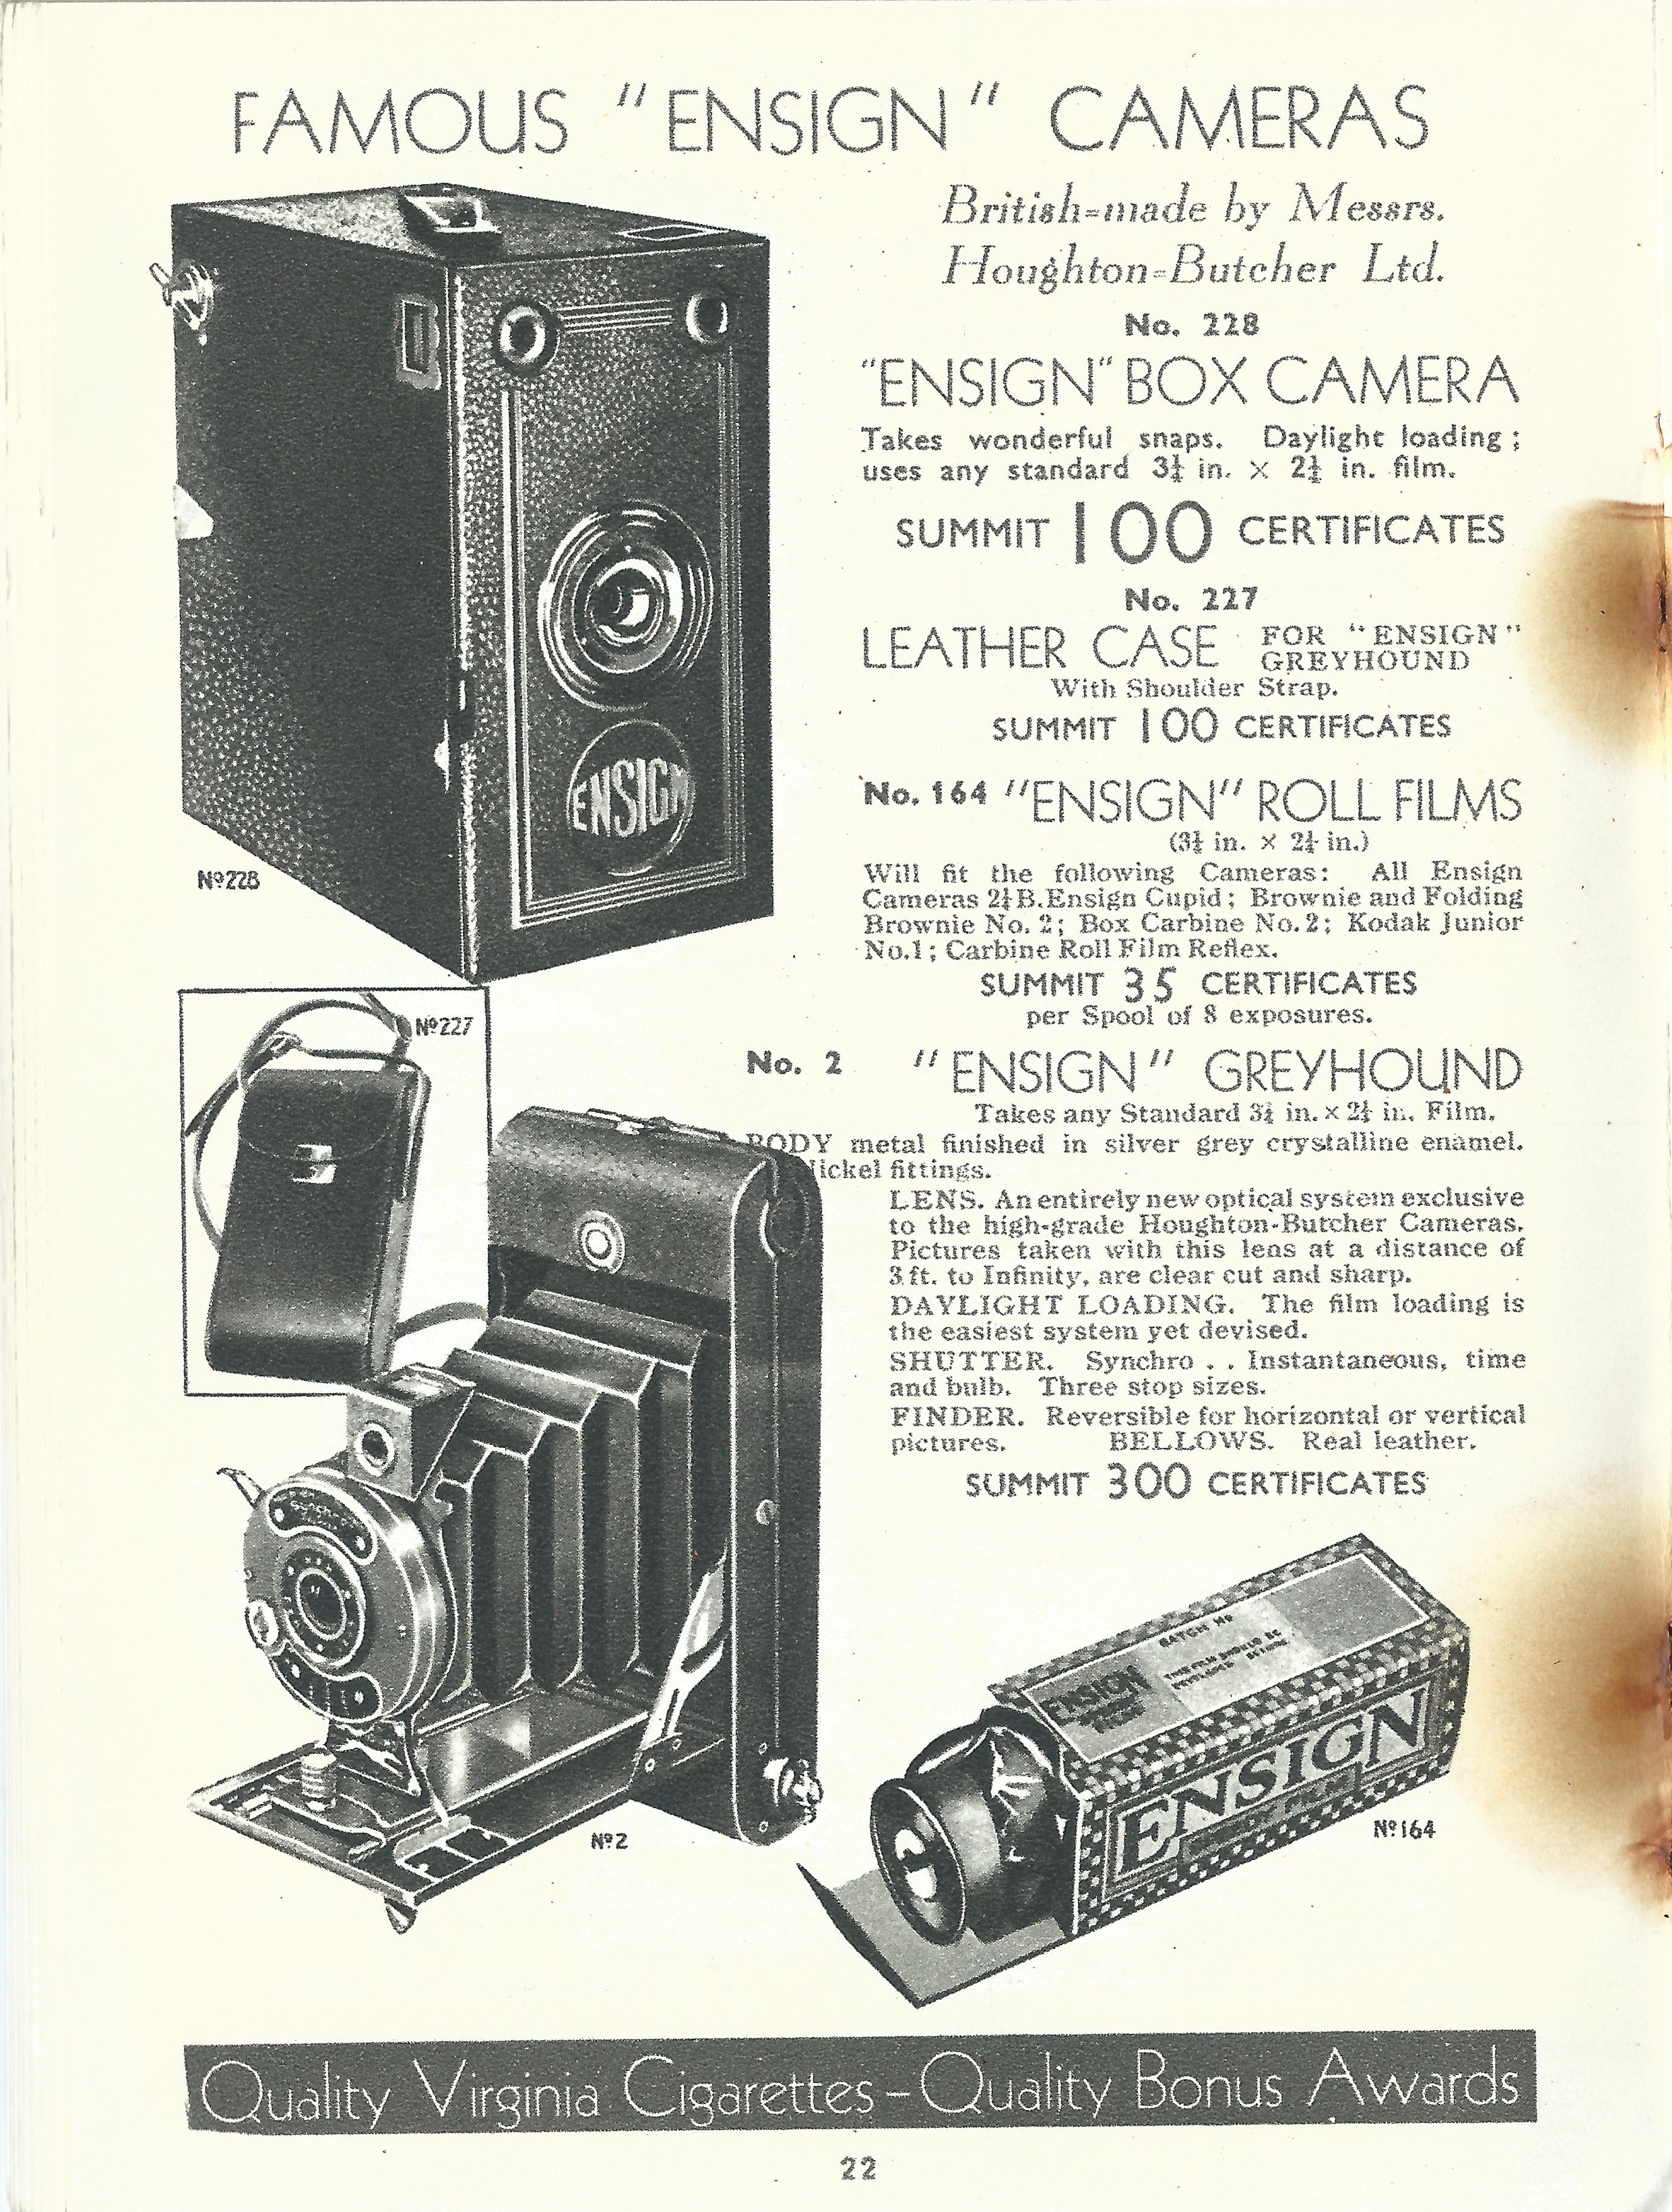 Image of Page 22 in the Summit Book dated October 1931 that shows the Ensign Greyhound camera